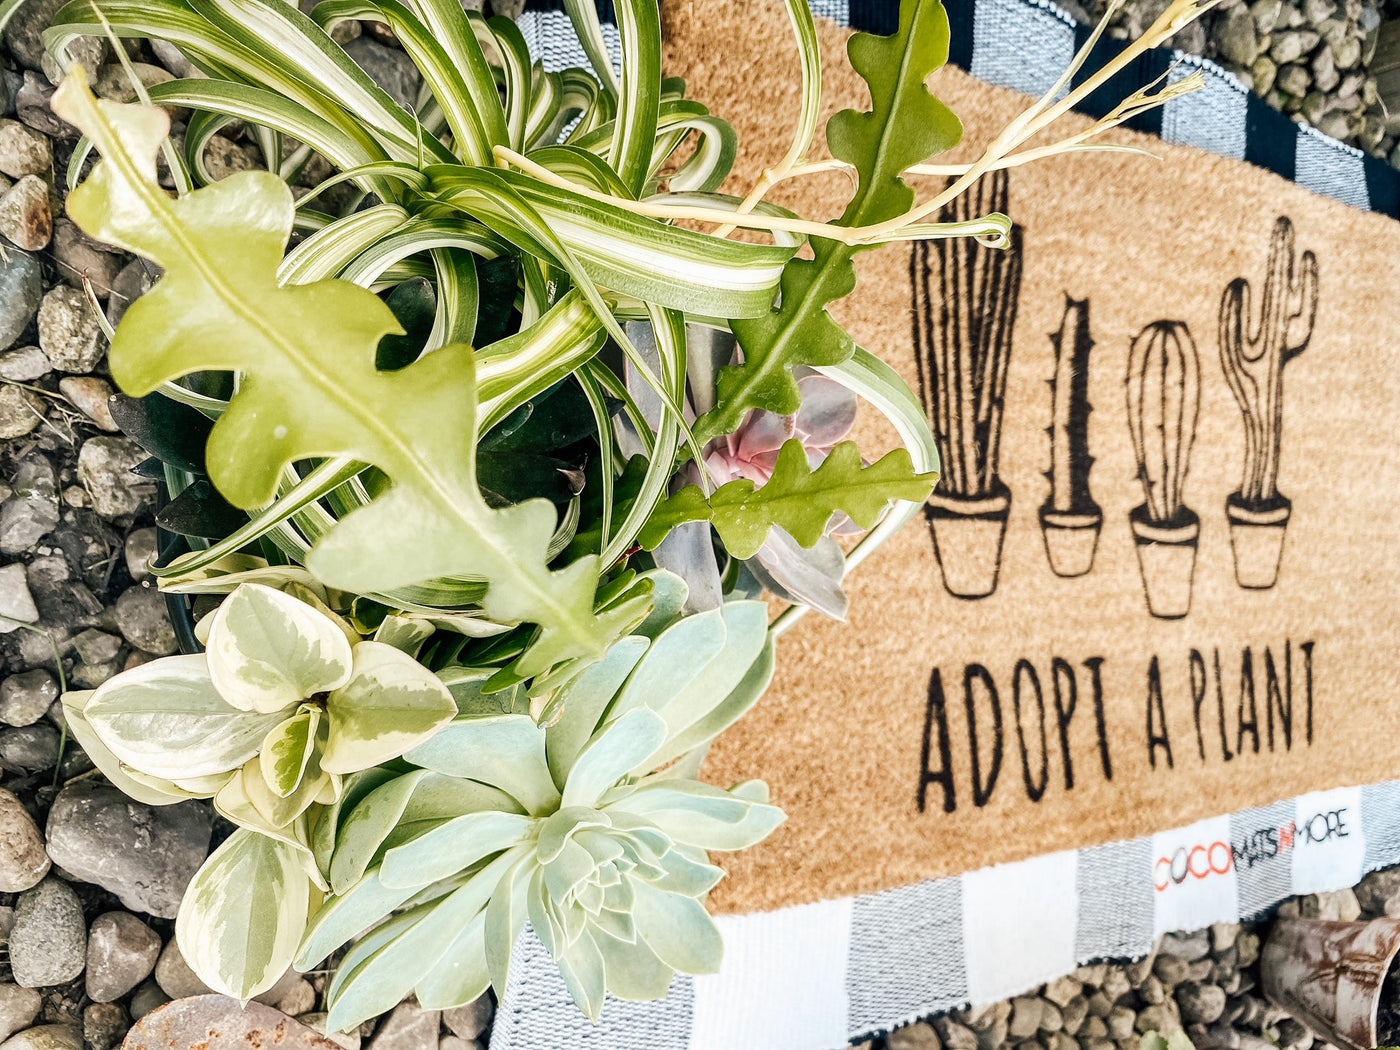 Adopt A Plant | Coco Mats N More